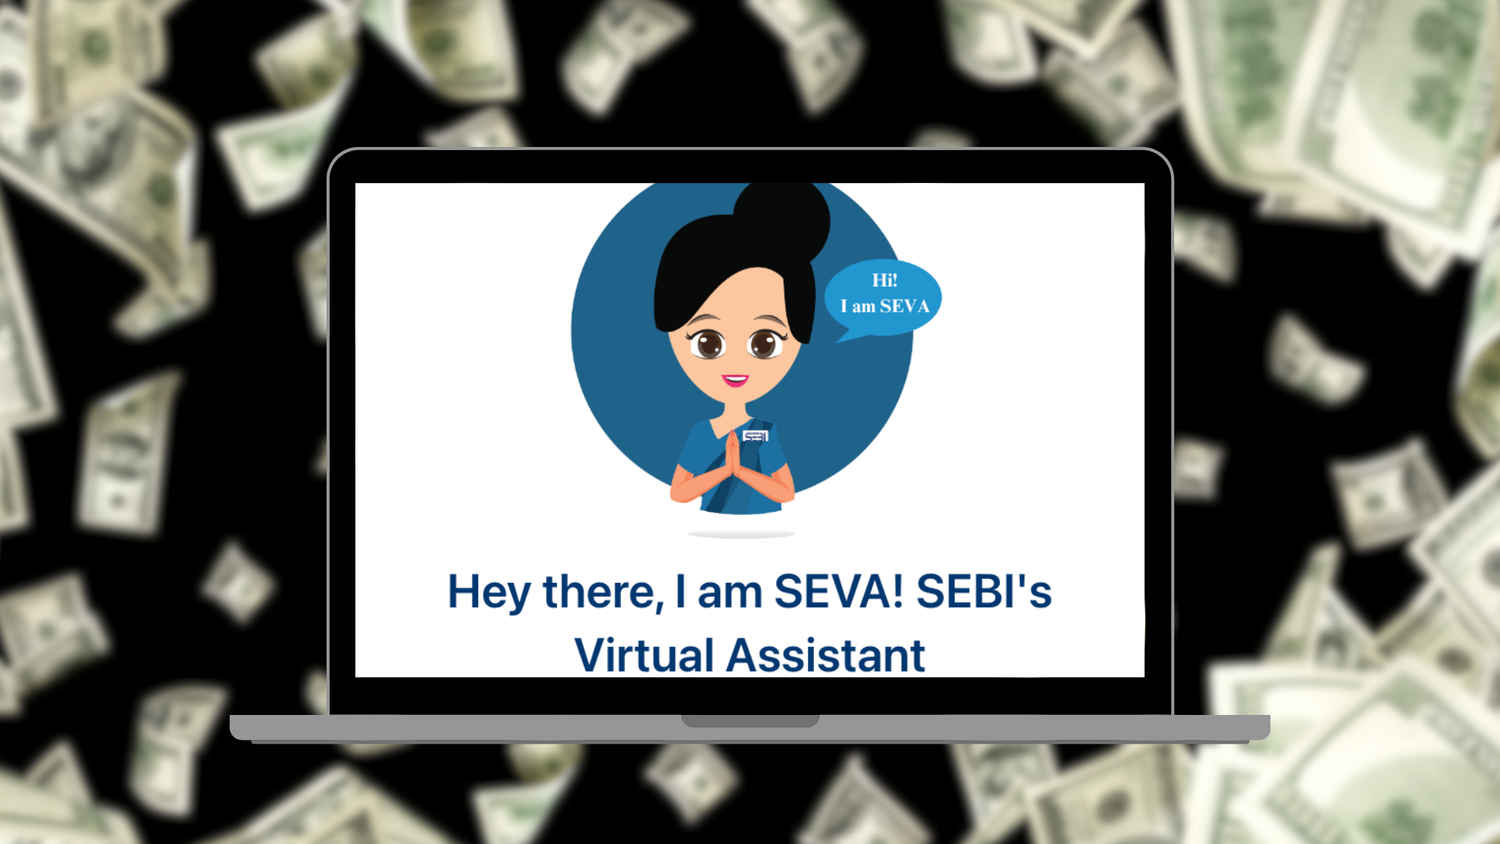 SEBI launches SEVA AI chatbot for investor protection and engagement: How to use